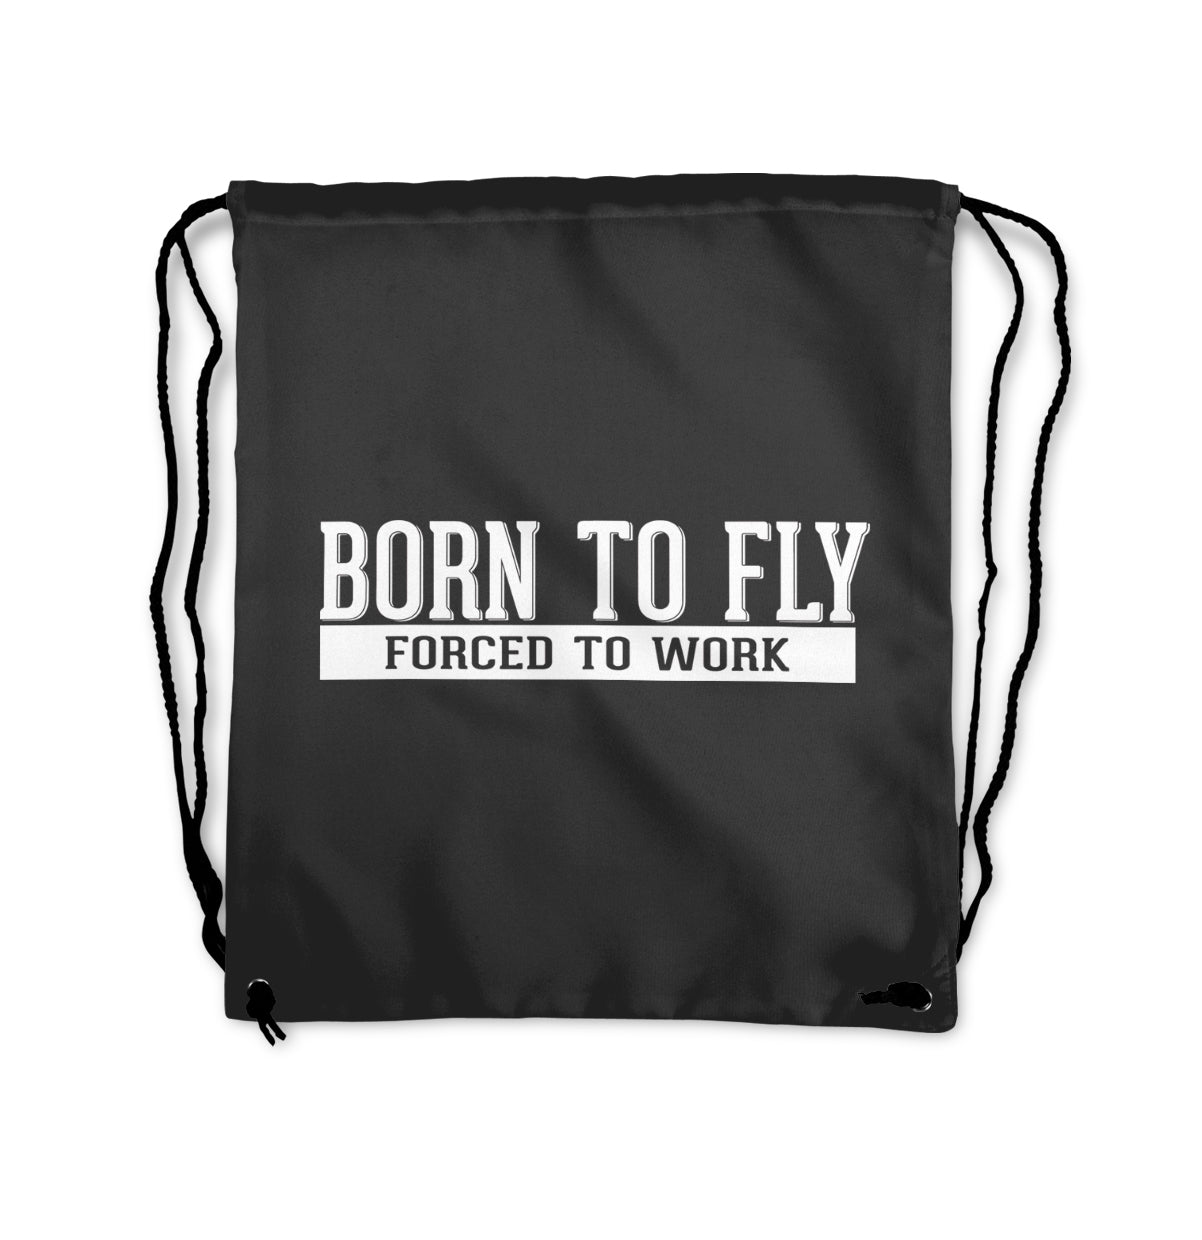 Born To Fly Forced To Work Designed Drawstring Bags